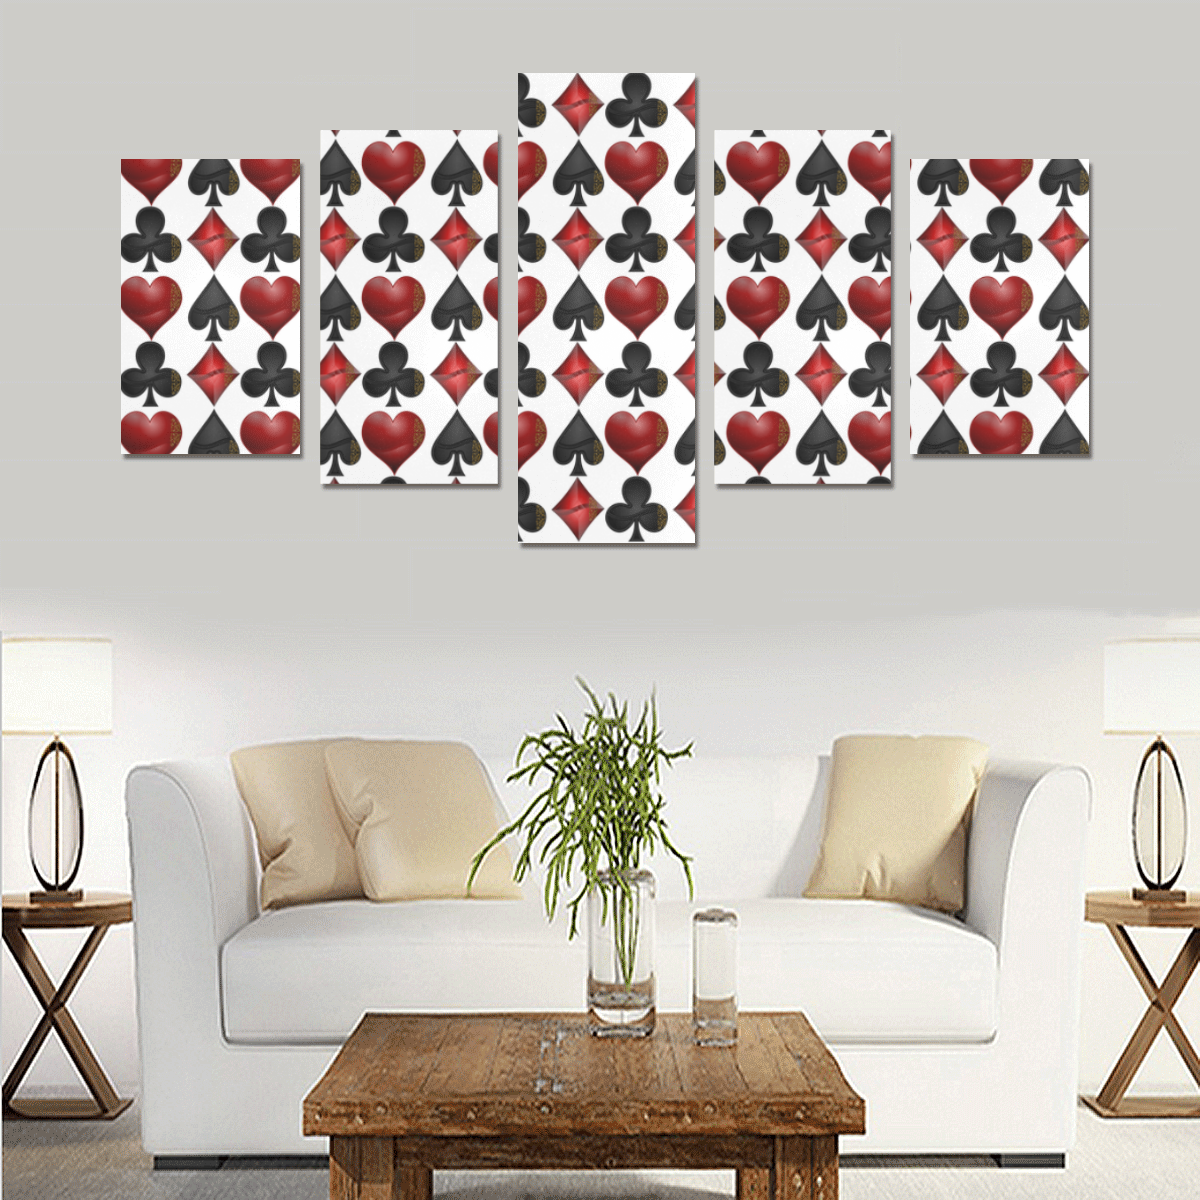 Las Vegas Black and Red Casino Poker Card Shapes Canvas Print Sets C (No Frame)